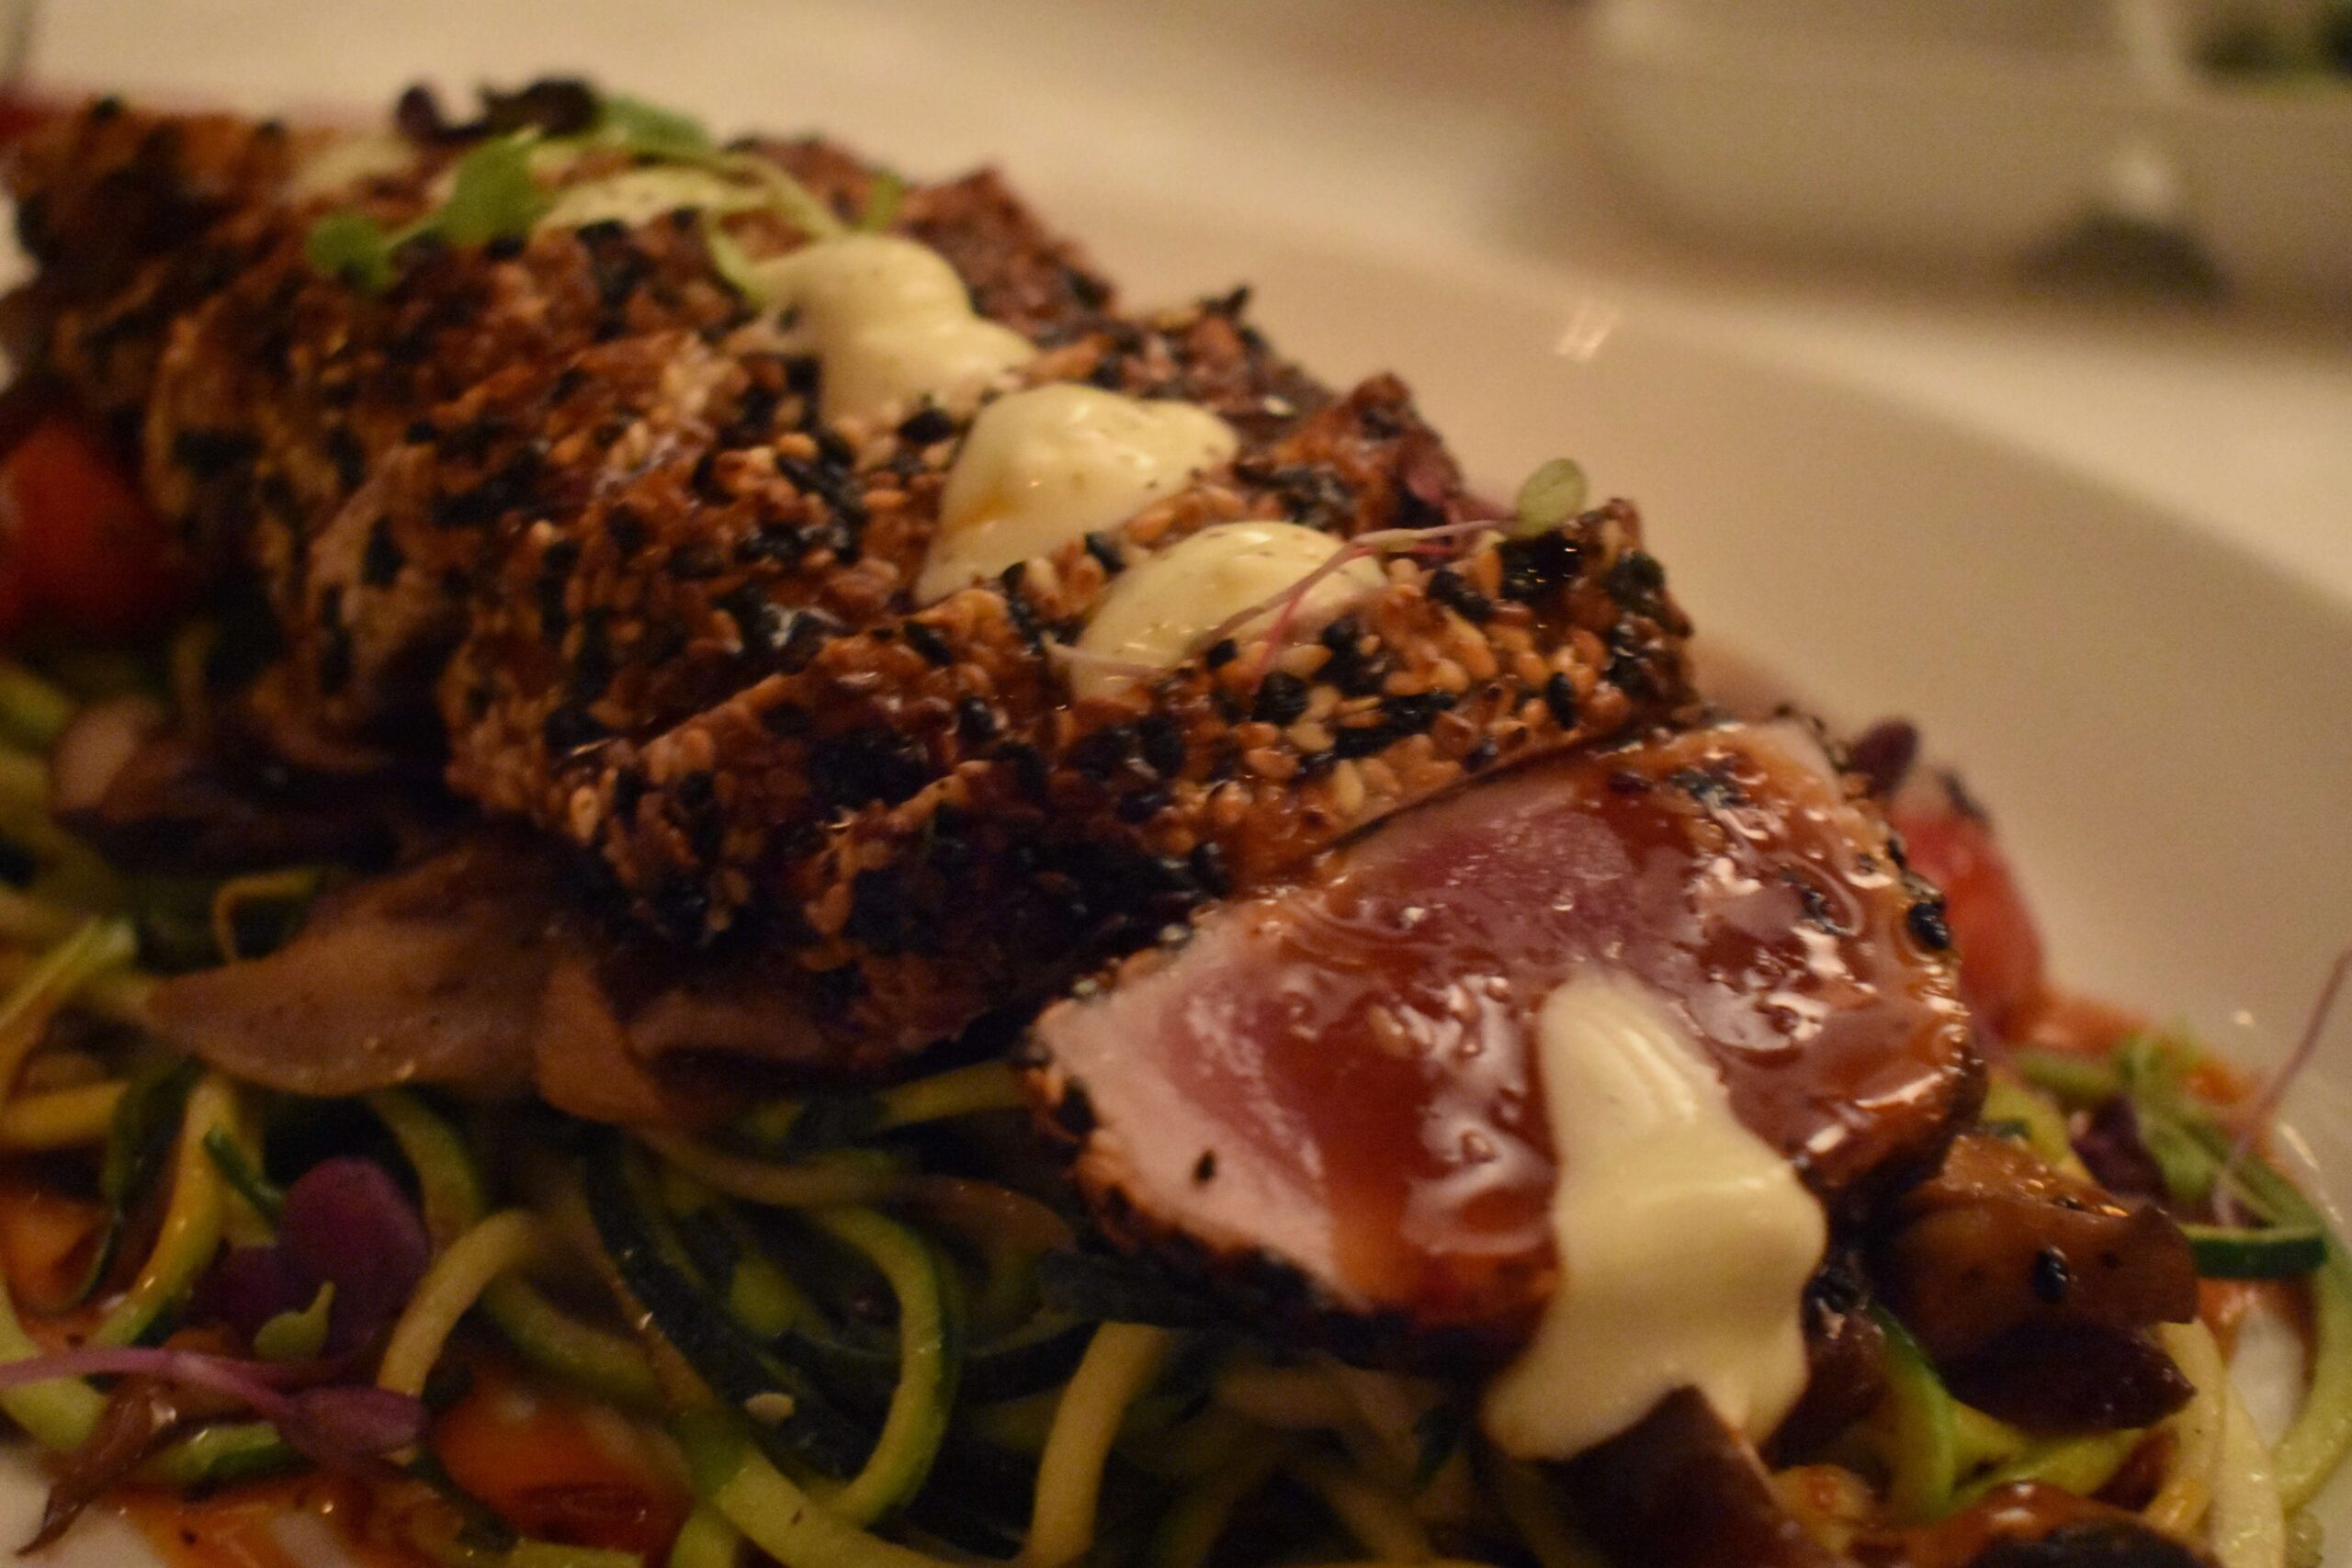 The restaurant also has more modern dishes, like sesame tuna.